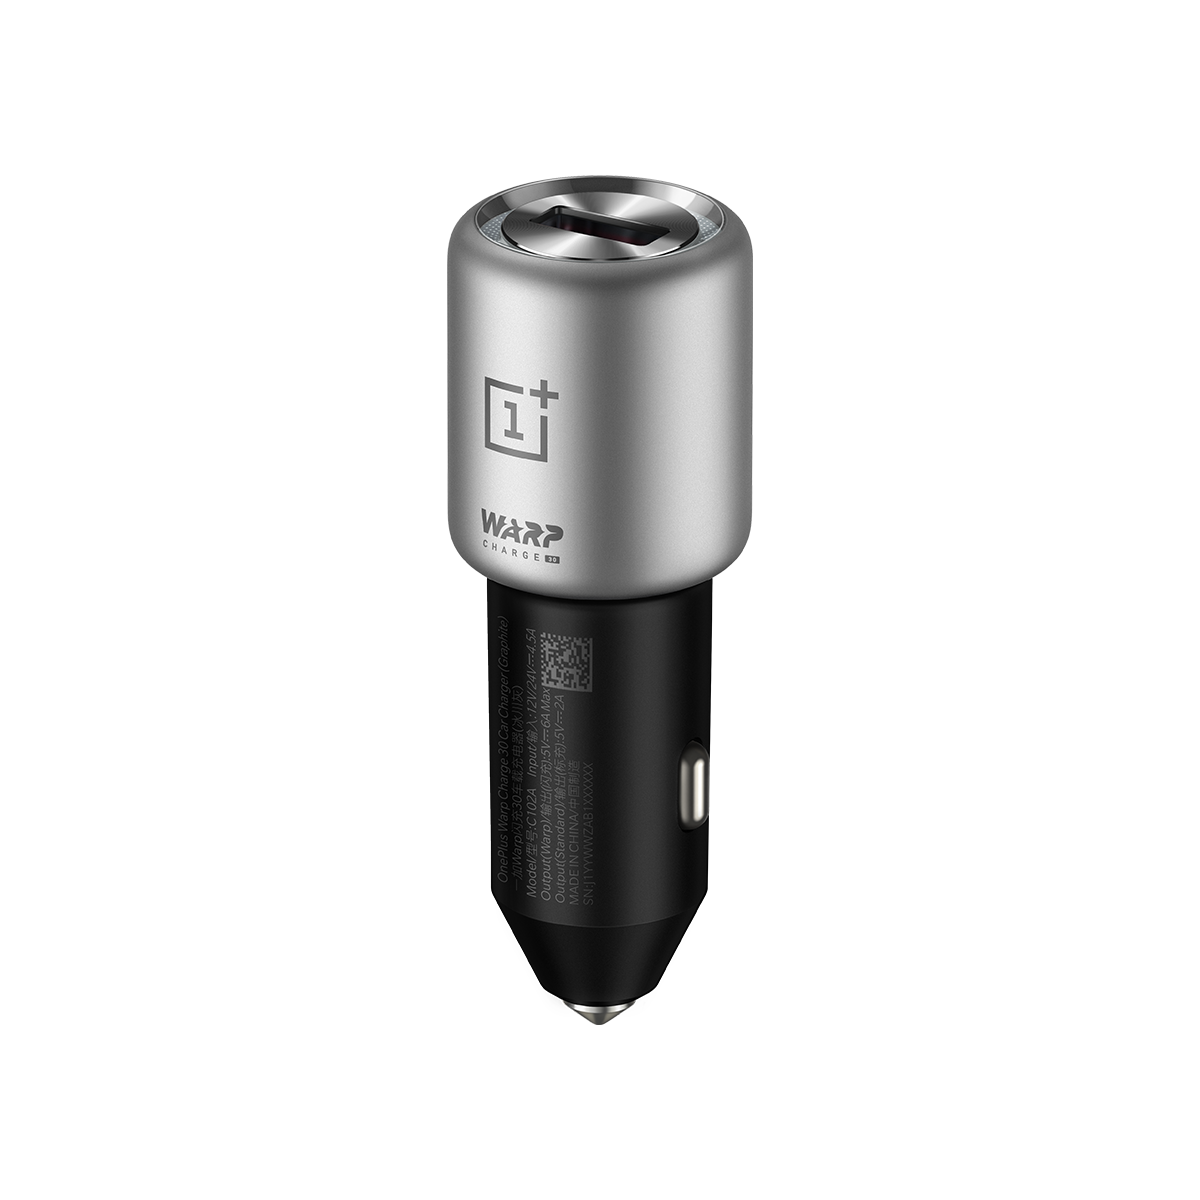 6T/6/5T/5/3T/3,Dual USB Charging Rapidly Car Charger Dash Charger with OnePlus Warp Charge USB Data Cable One Plus 3/5 5T Charger+Cable Warp Car Charger for Oneplus 7 Pro 6T/ 7 Pro 6 